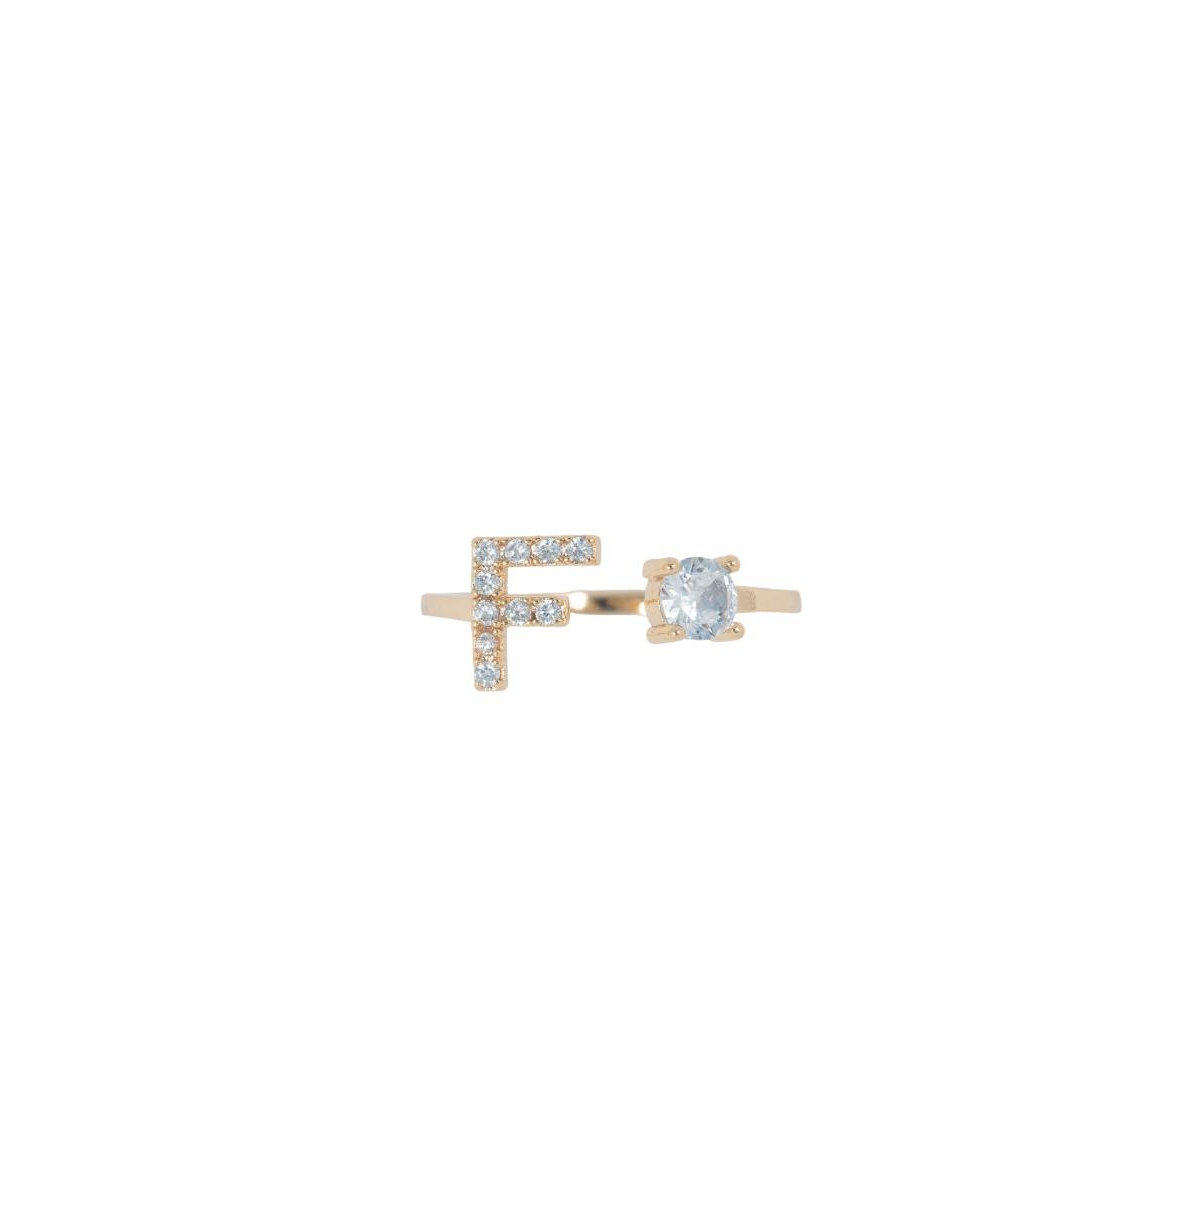 Crystal Initial Adjustable Gold-Tone Ring - Gold plated with crystals